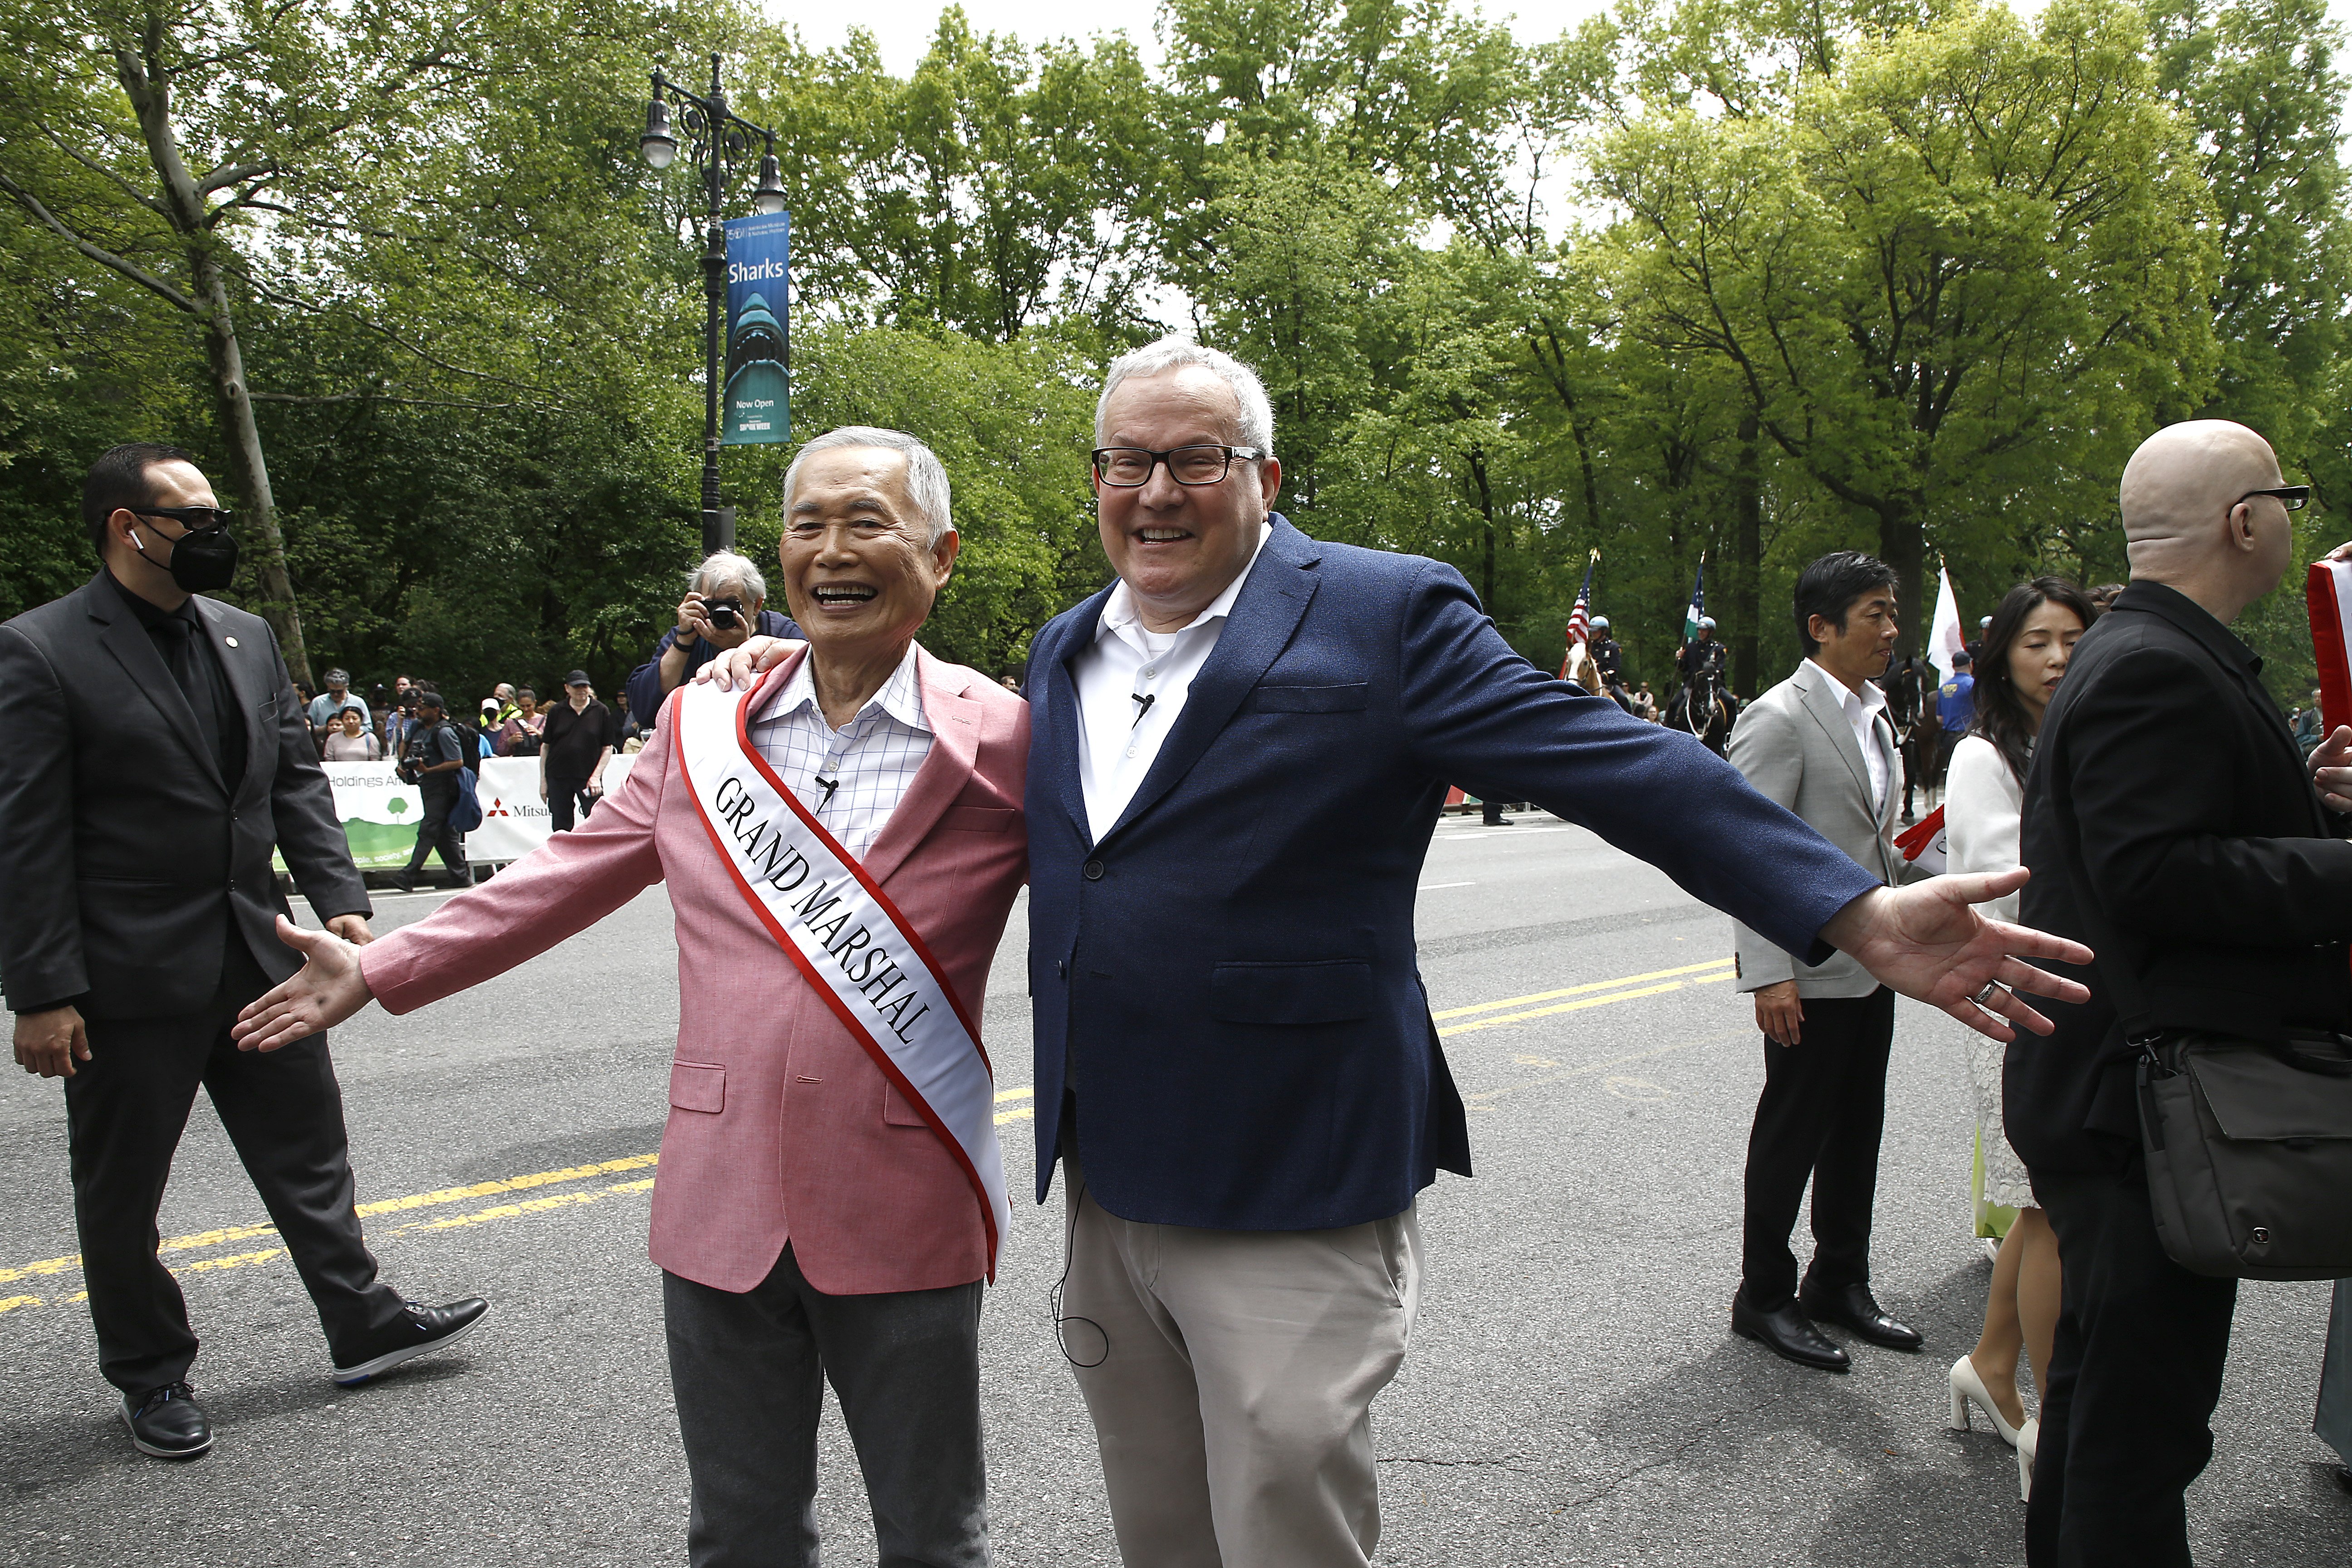 George Takei and Brad Altman at the Inaugural Japan Parade in New York on May 14, 2022 | Source: Getty Images